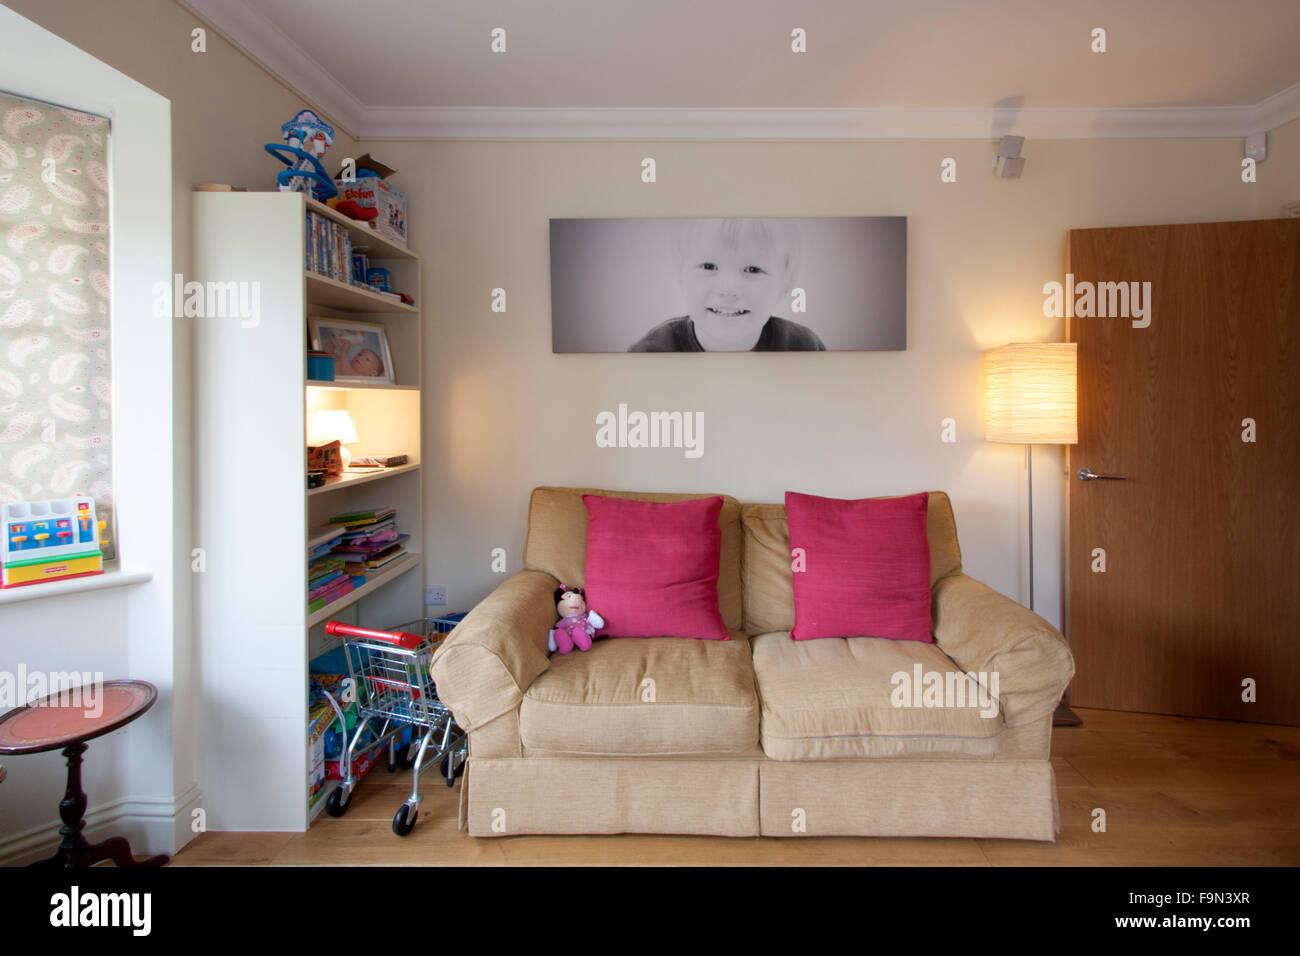 Children's play room with toys and a sofa Stock Photo